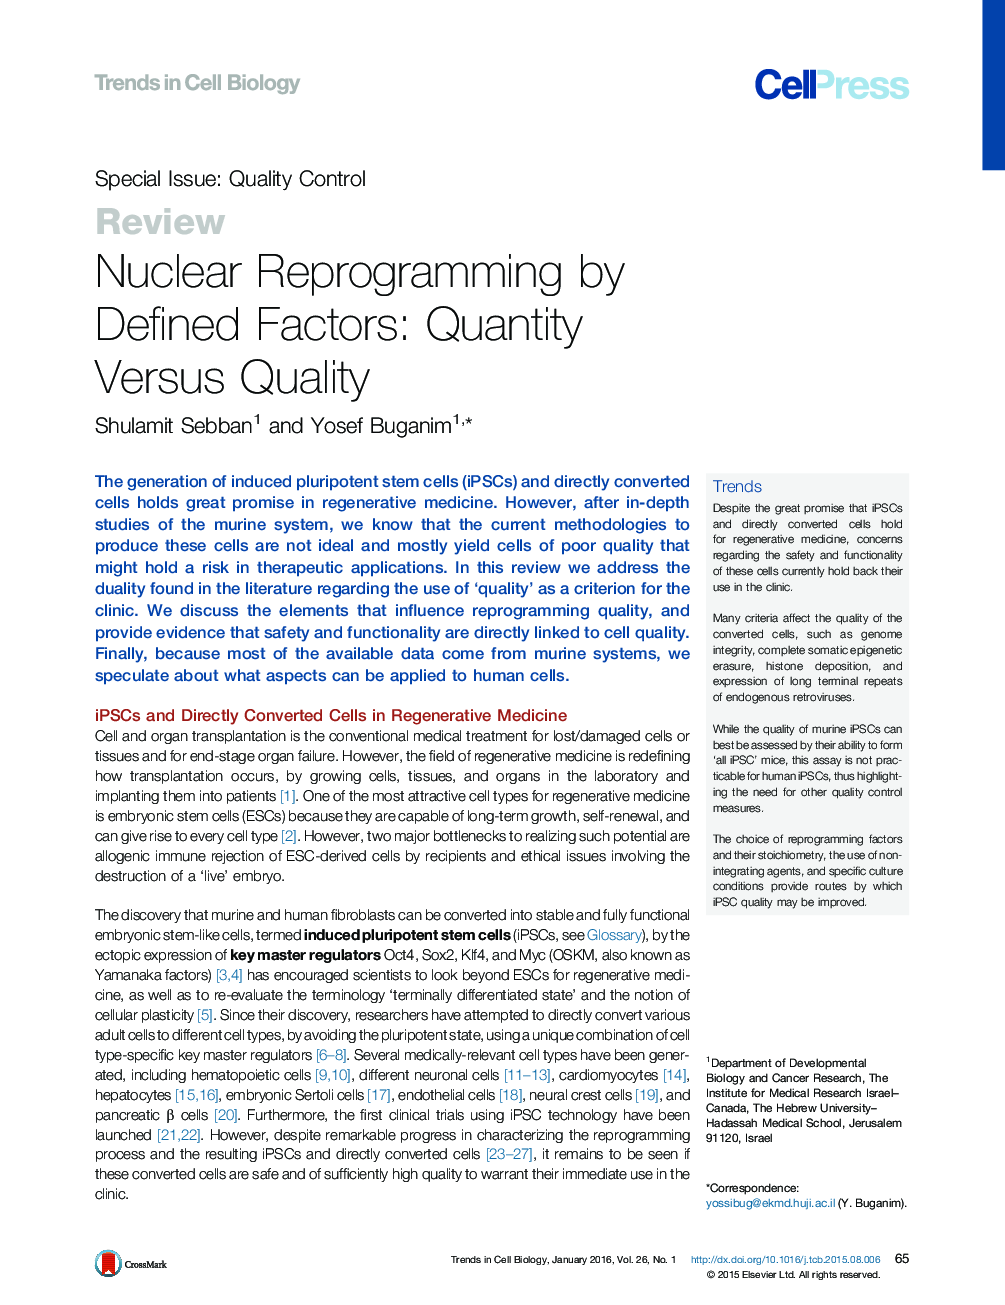 Nuclear Reprogramming by Defined Factors: Quantity Versus Quality